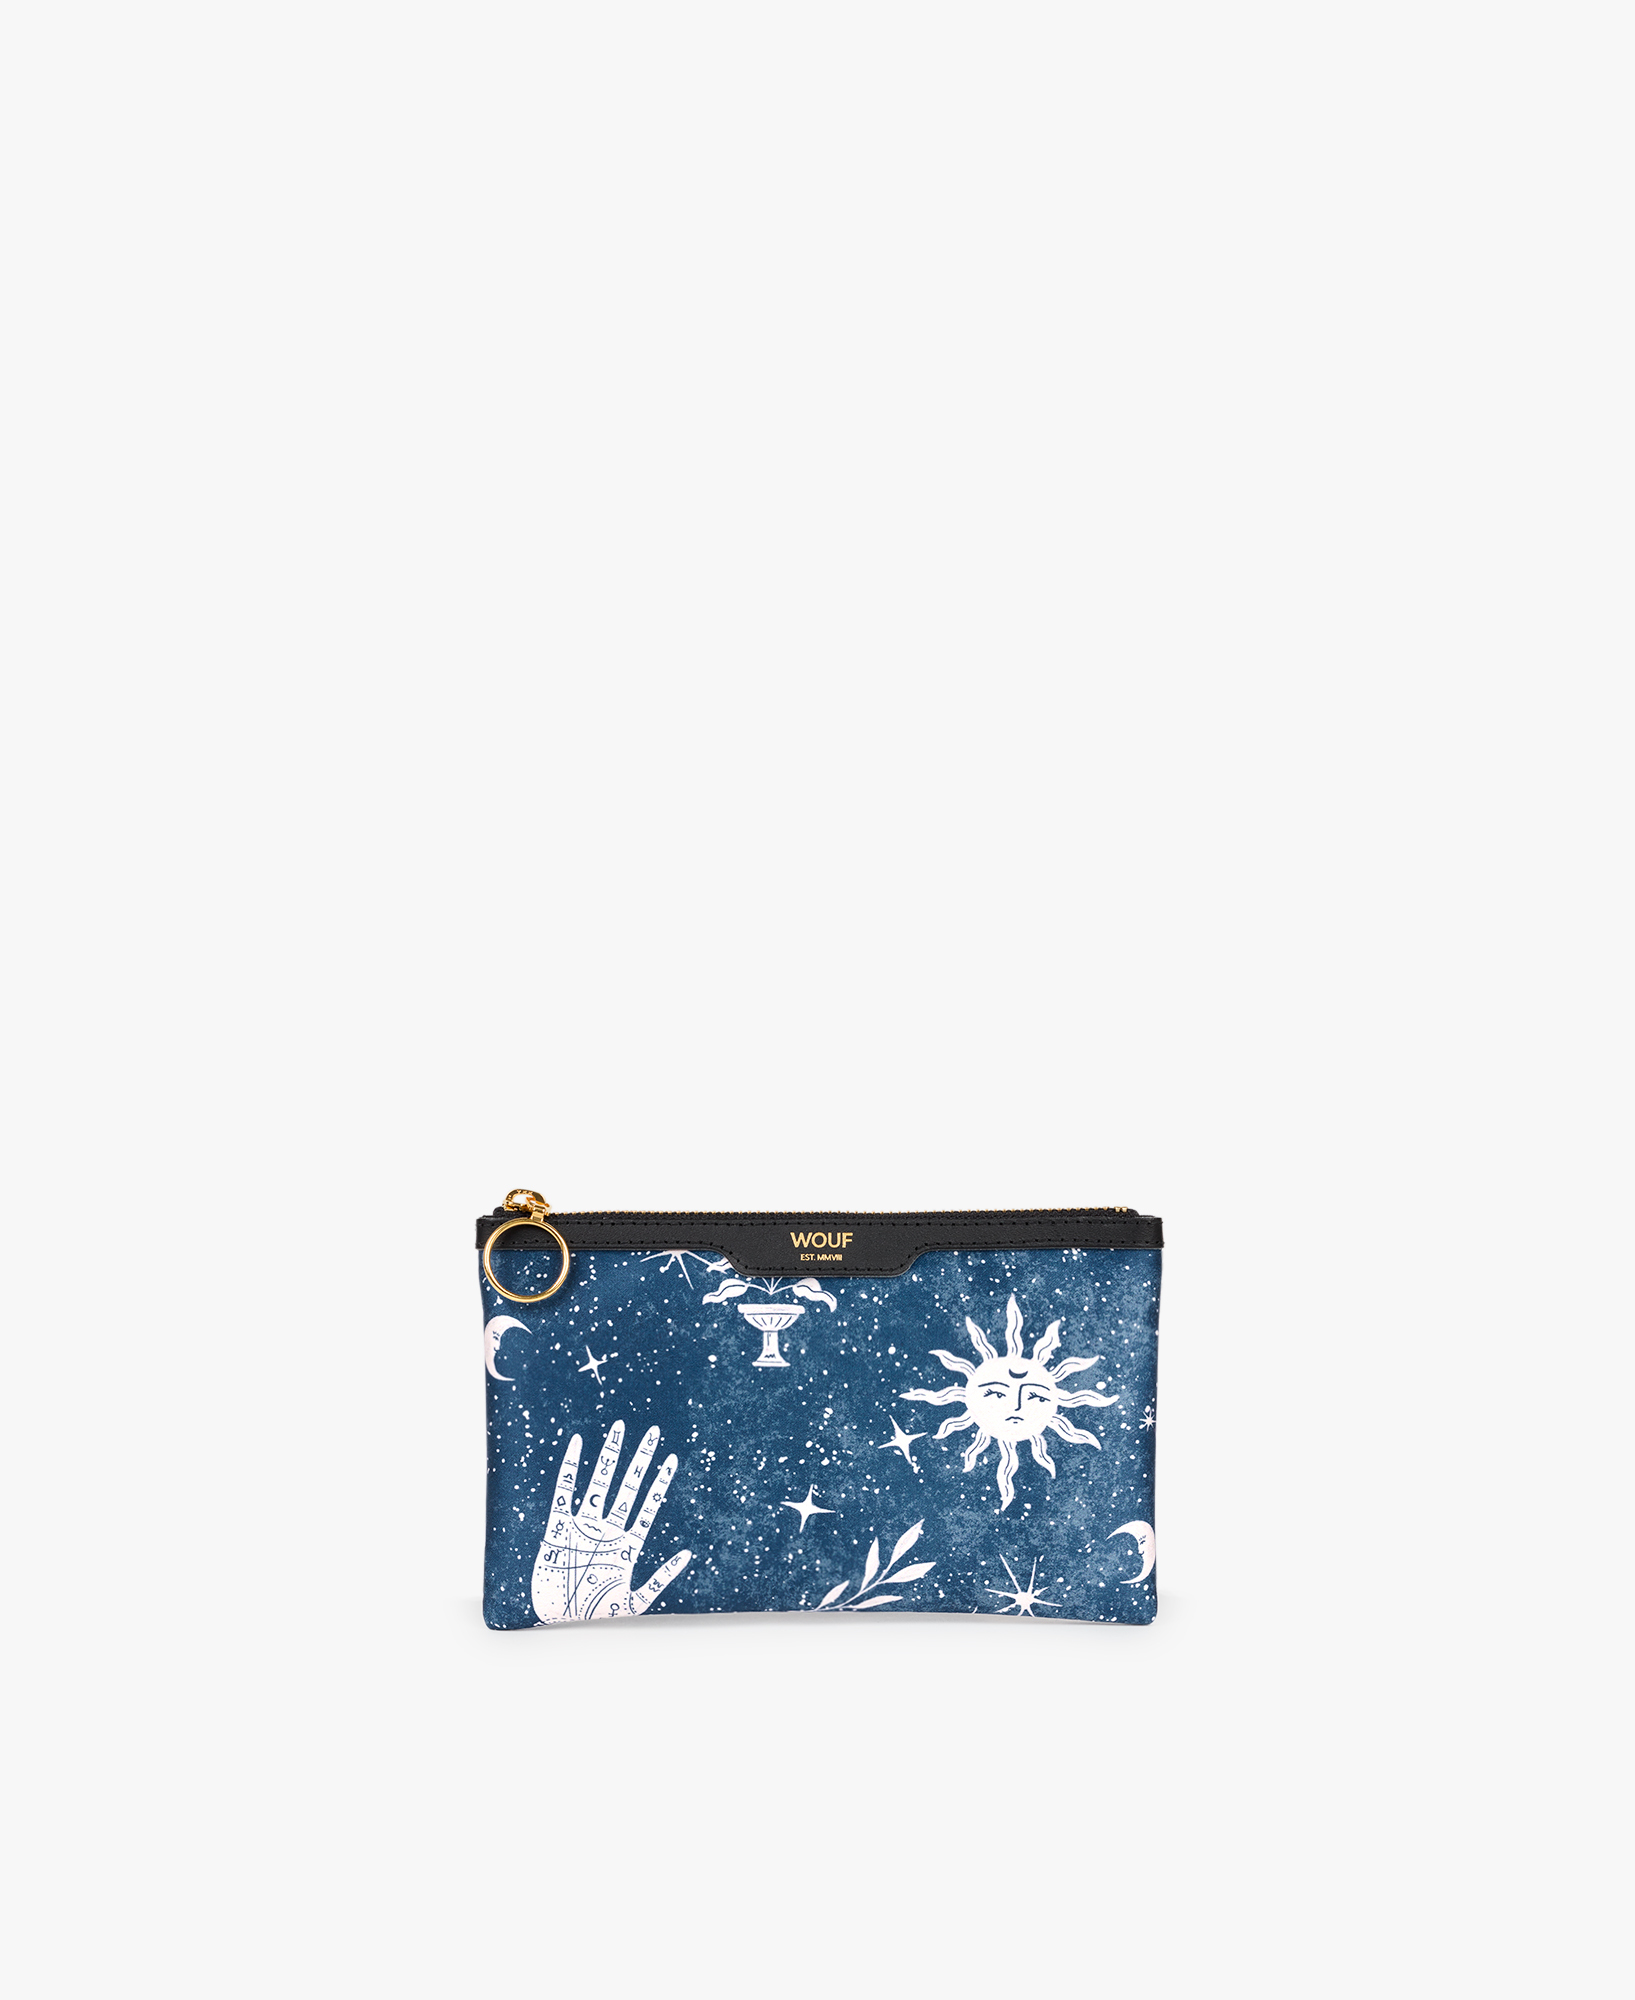 Wouf Esoteric Pocket Clutch